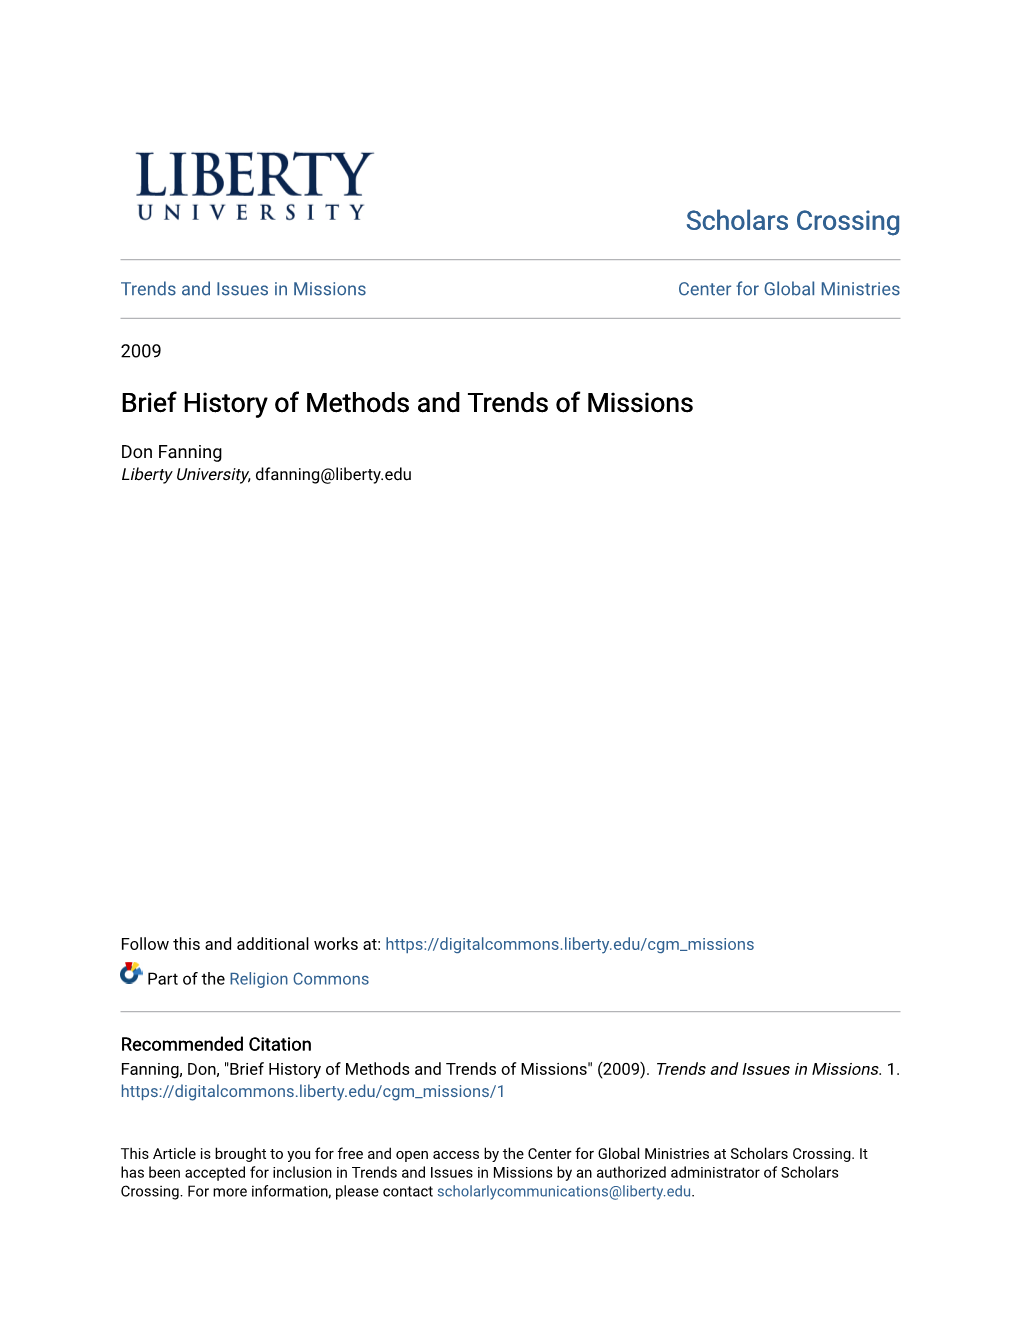 Brief History of Methods and Trends of Missions